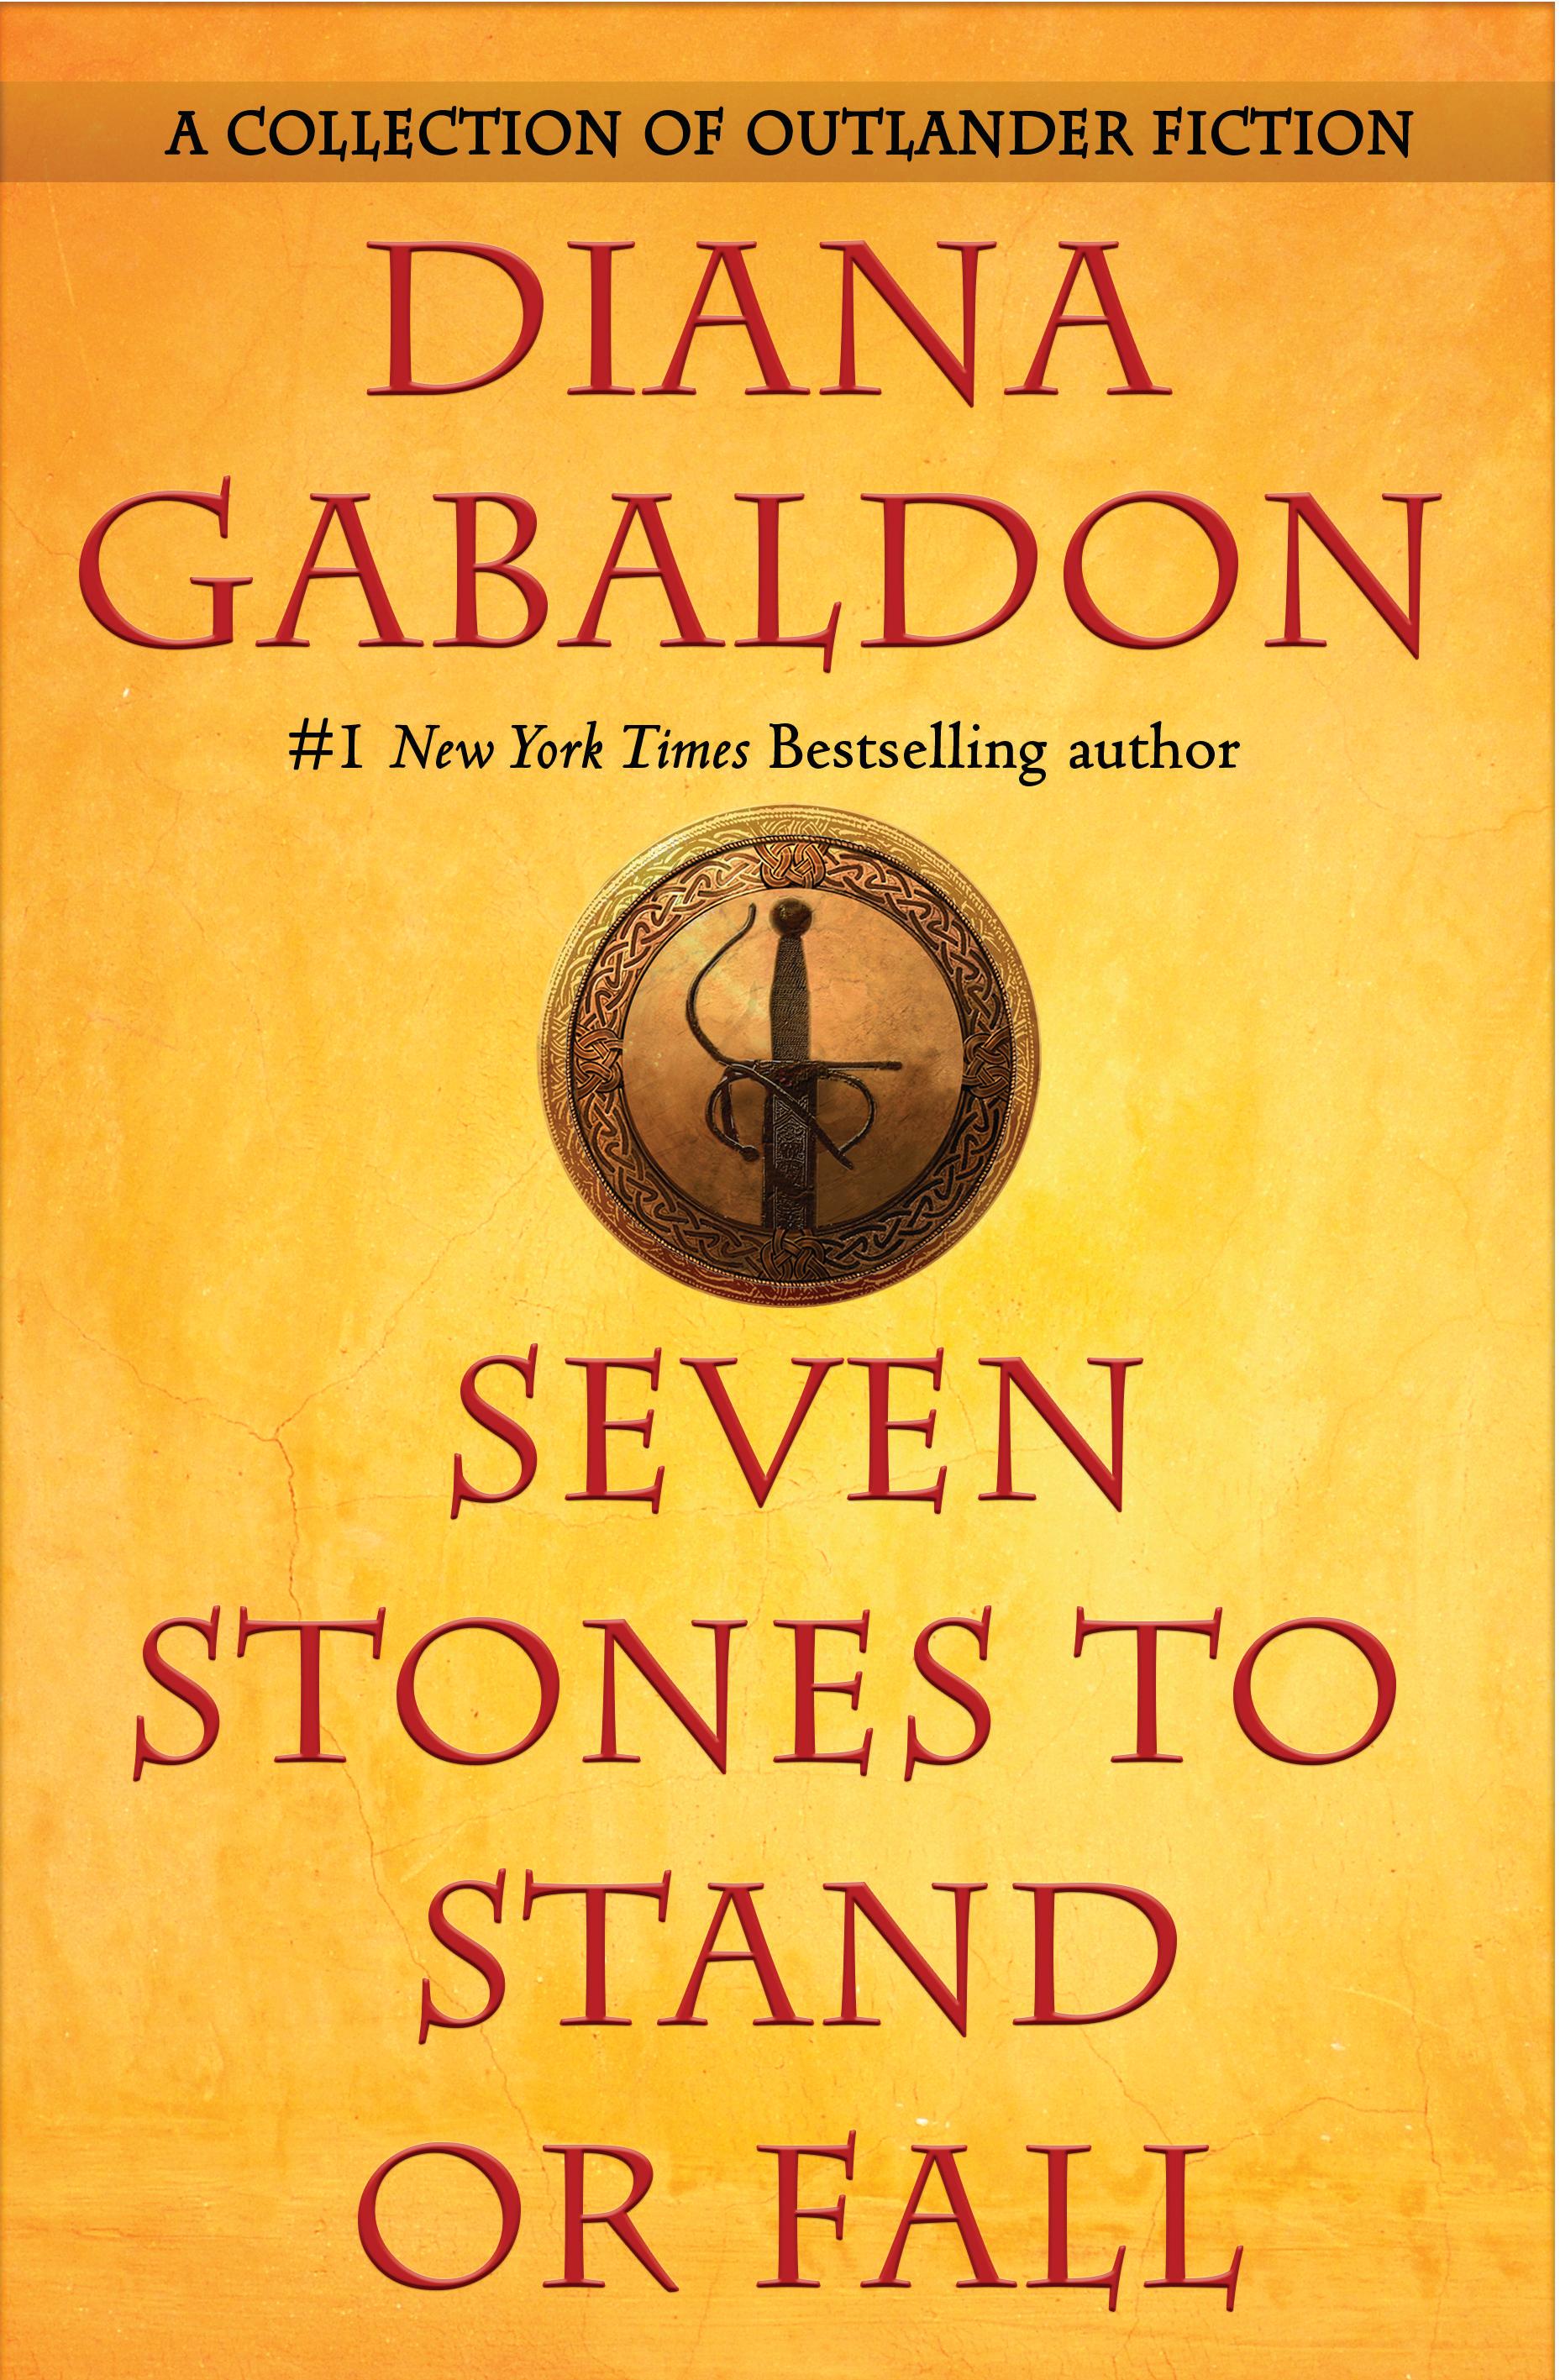 read-an-excerpt-from-diana-gabaldon-s-outlander-story-collection